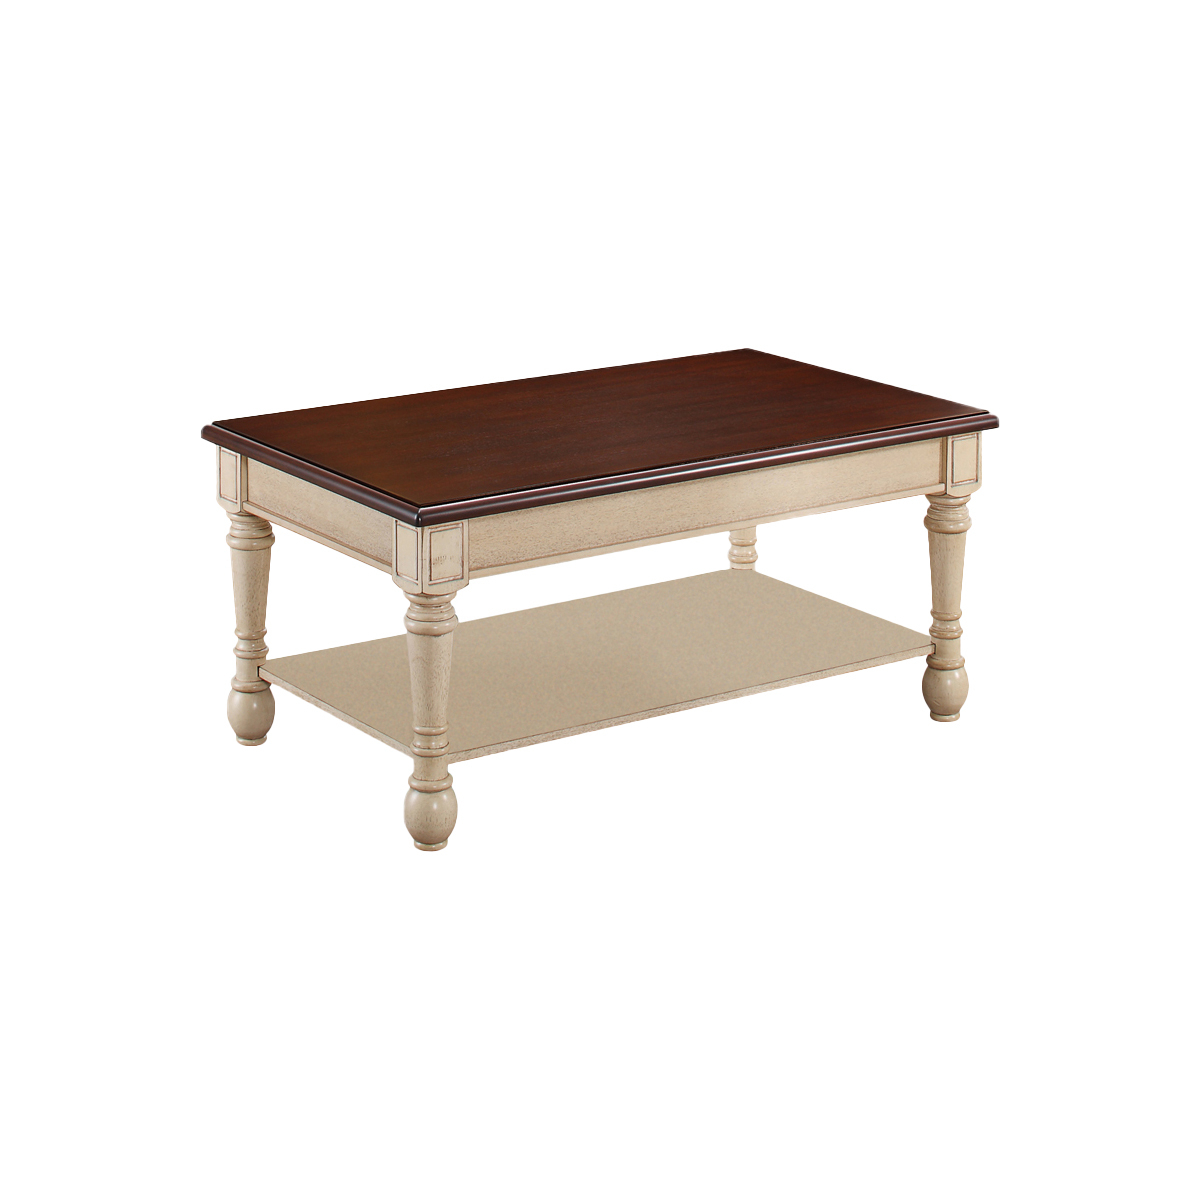 Wooden Frame Coffee Table With Turned Legs, Brown And Antique White- Saltoro Sherpi